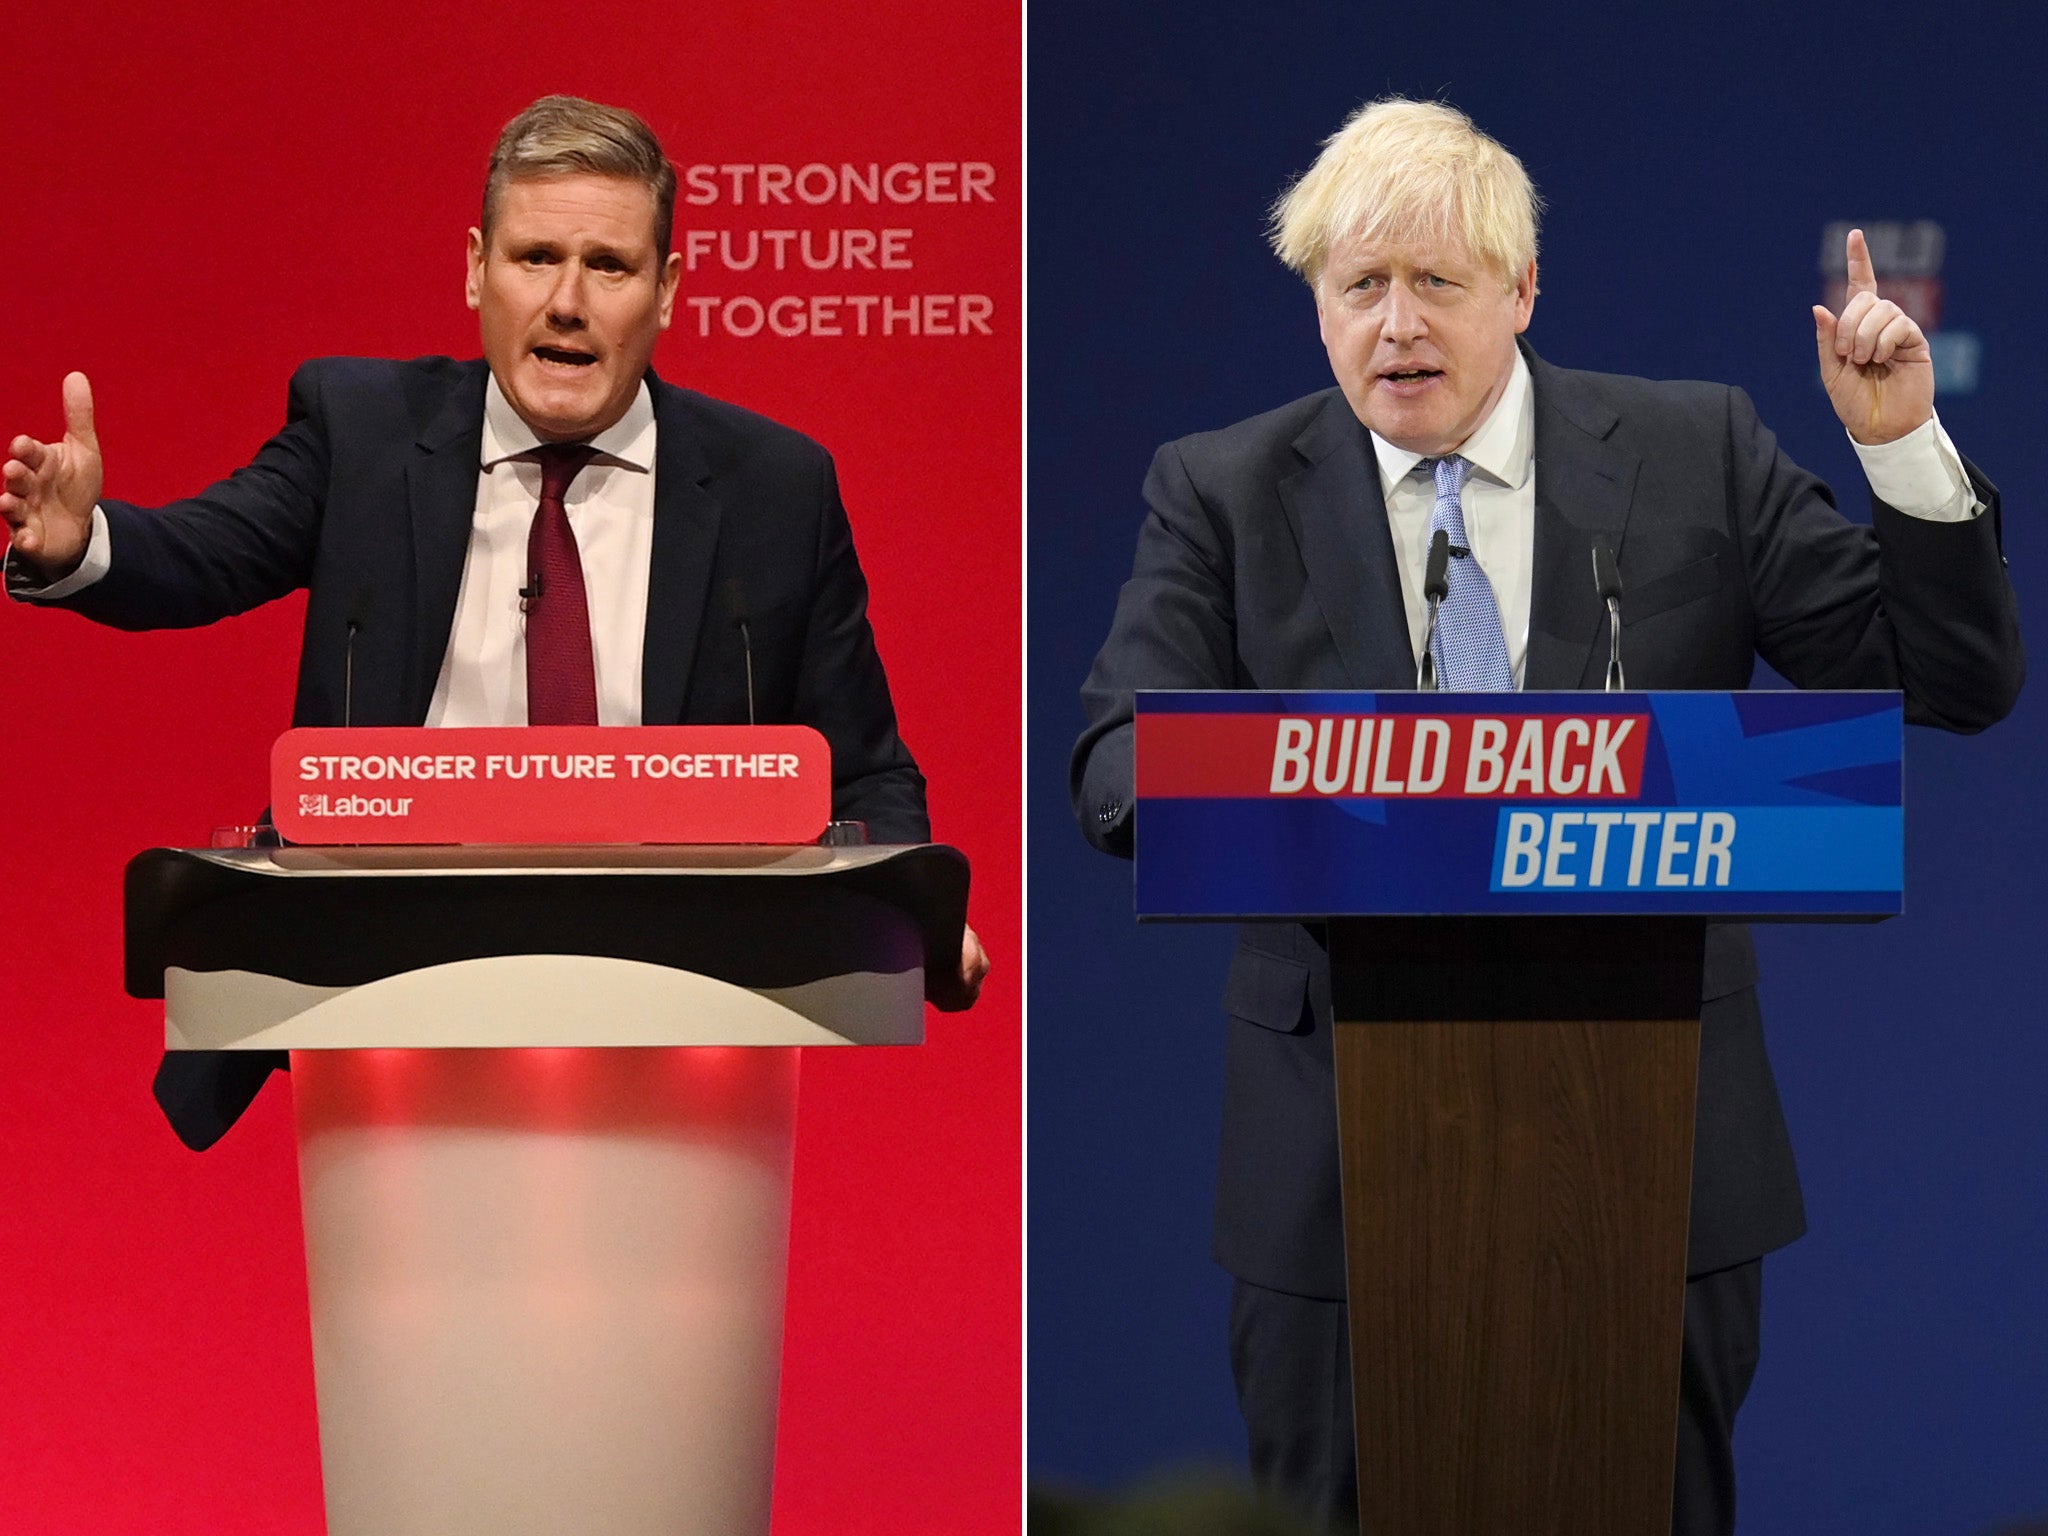 Starmer went down better than Johnson this year– but it’s the polls that matter